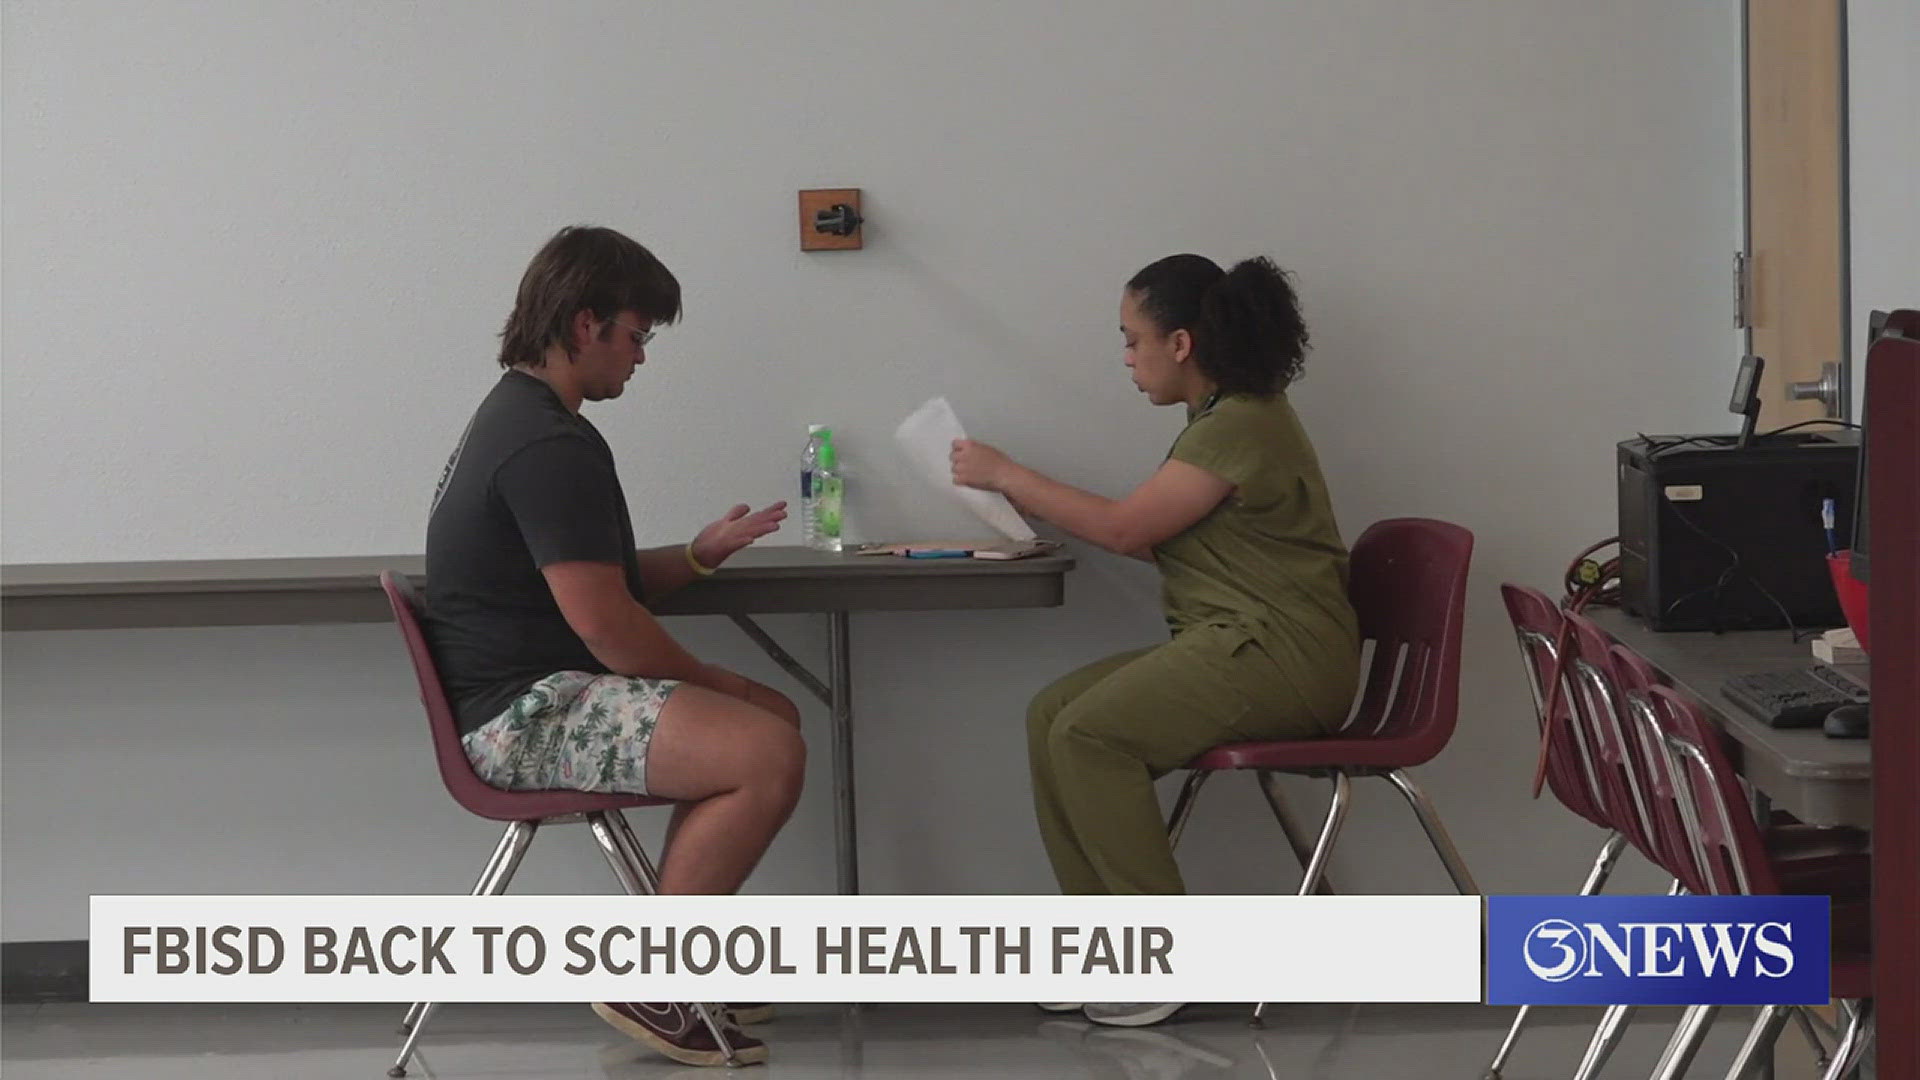 For almost a decade Nueces County has partnered with Flour Bluff High School to help students get free health services to get them ready for the new school year.